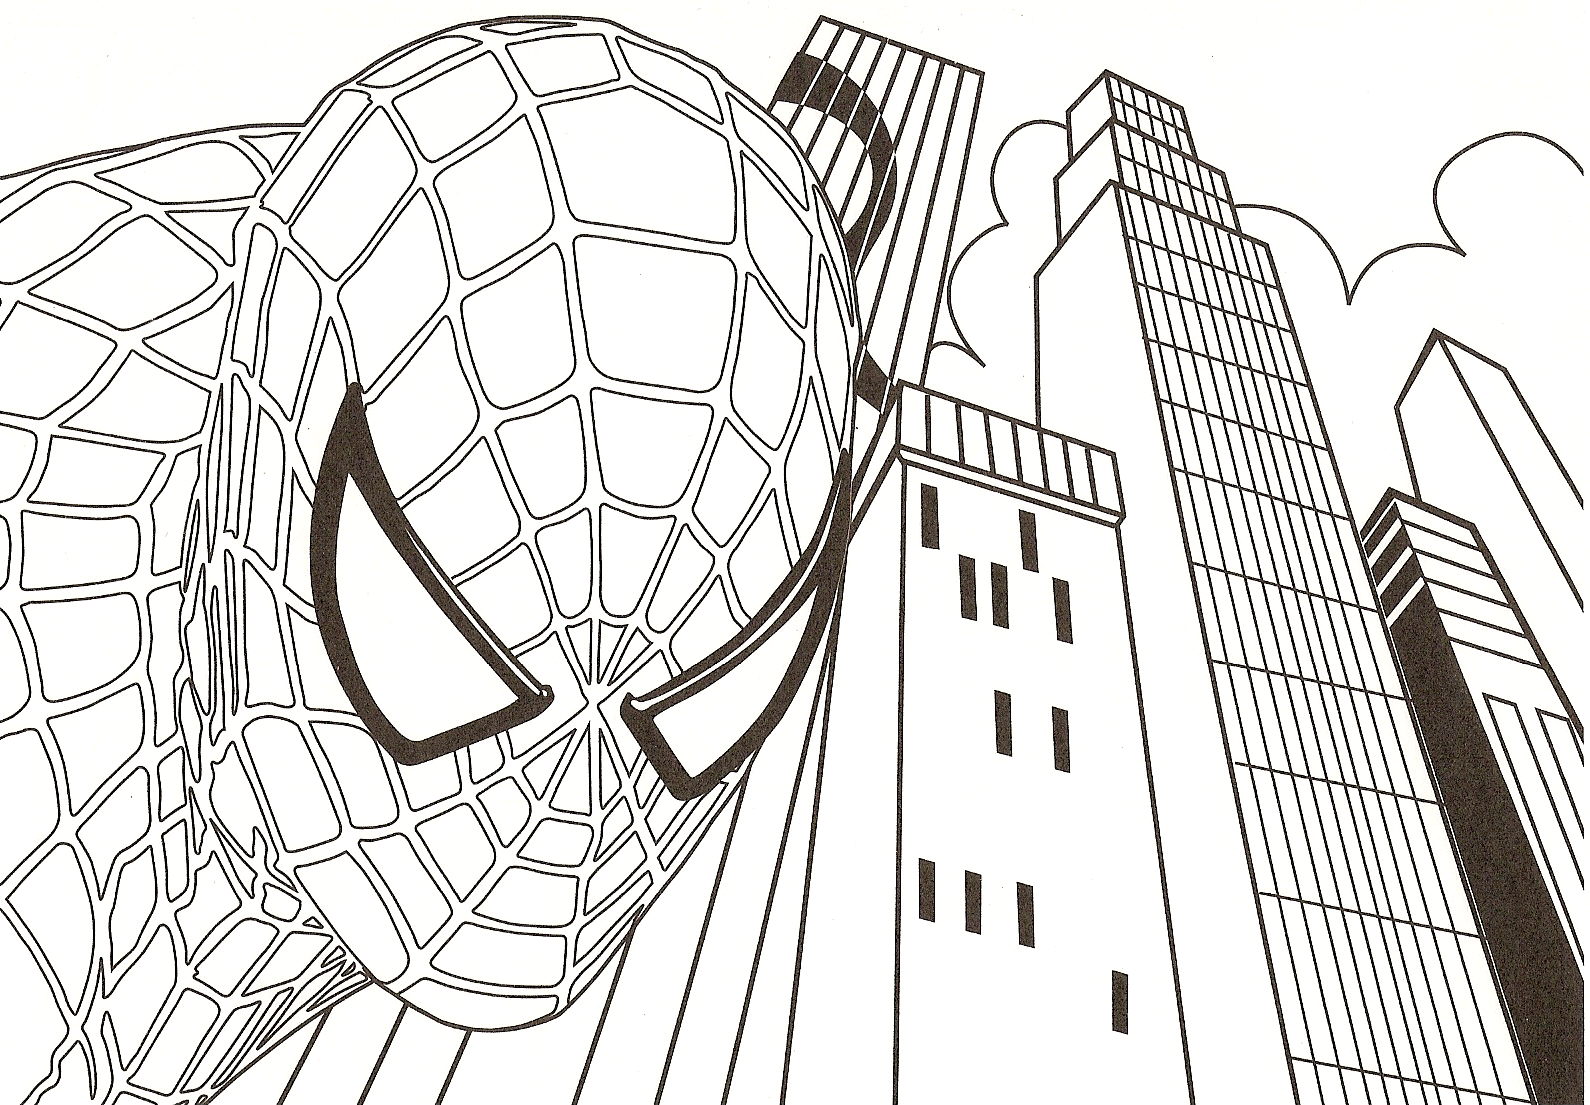 SPIDERMAN COLORING: COLORING PICTURES OF SPIDERMAN